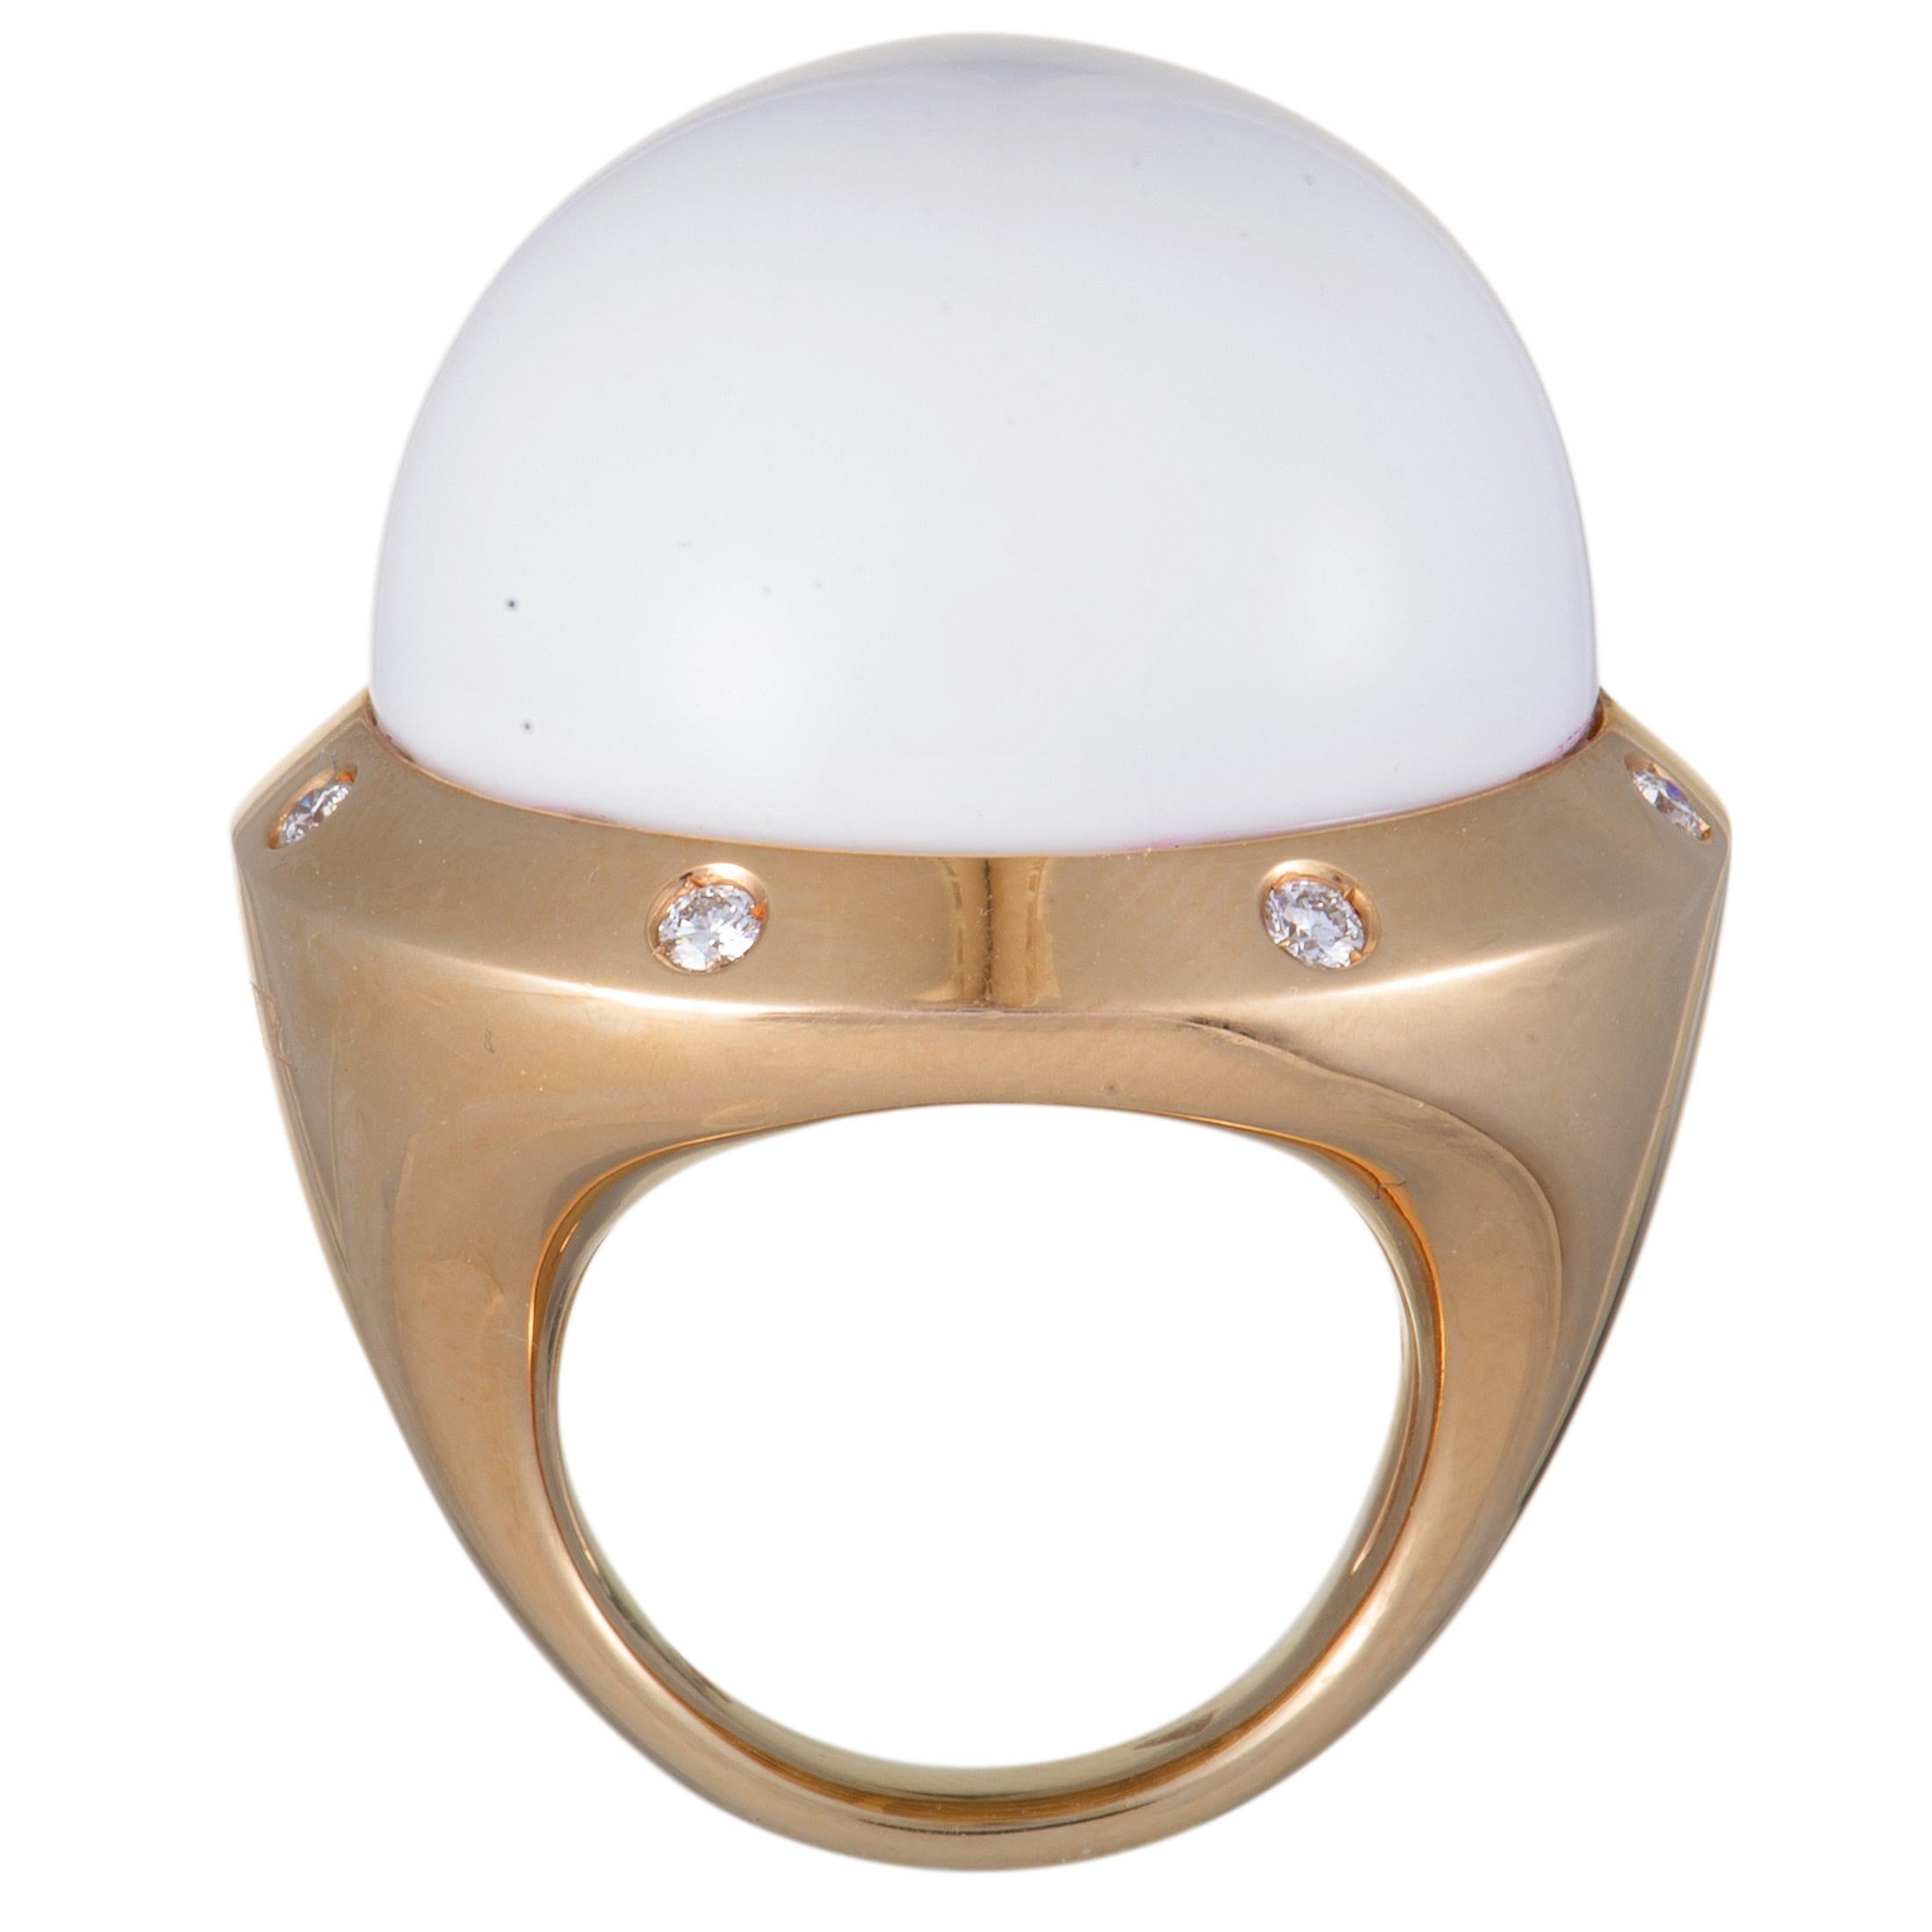 The sublime beauty of white agate is brought out in a splendidly luxurious manner in this fabulous jewelry piece by the alluring radiance of rose gold and the enticing brilliance of white diamonds. The ring is wonderfully designed by Valente and it